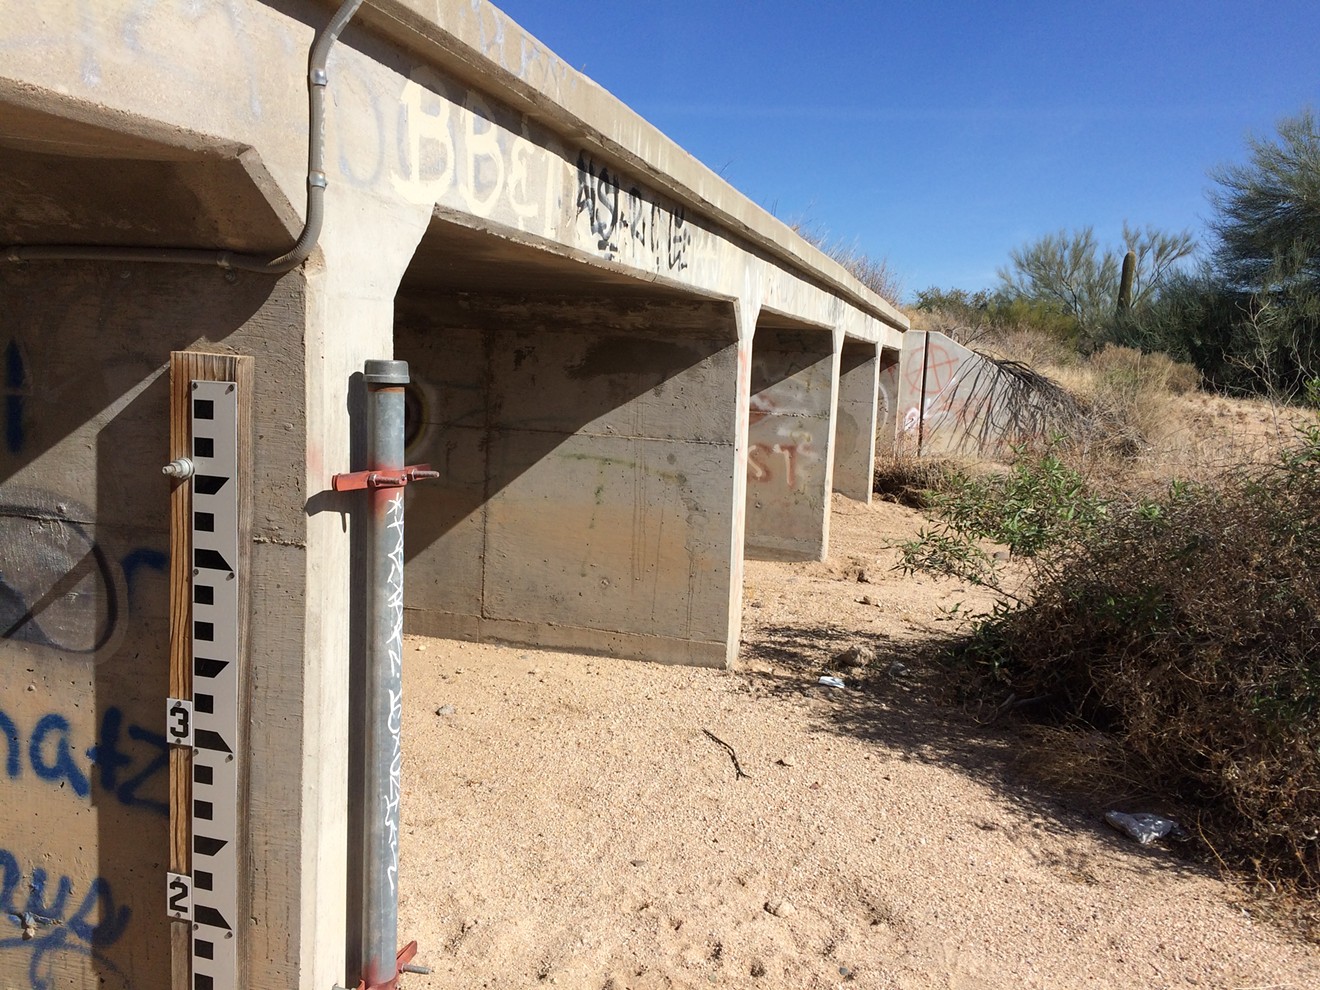 The Rawhide Wash Mitigation Project in northwest Scottsdale should save homeowners money, but it might cost them even more.